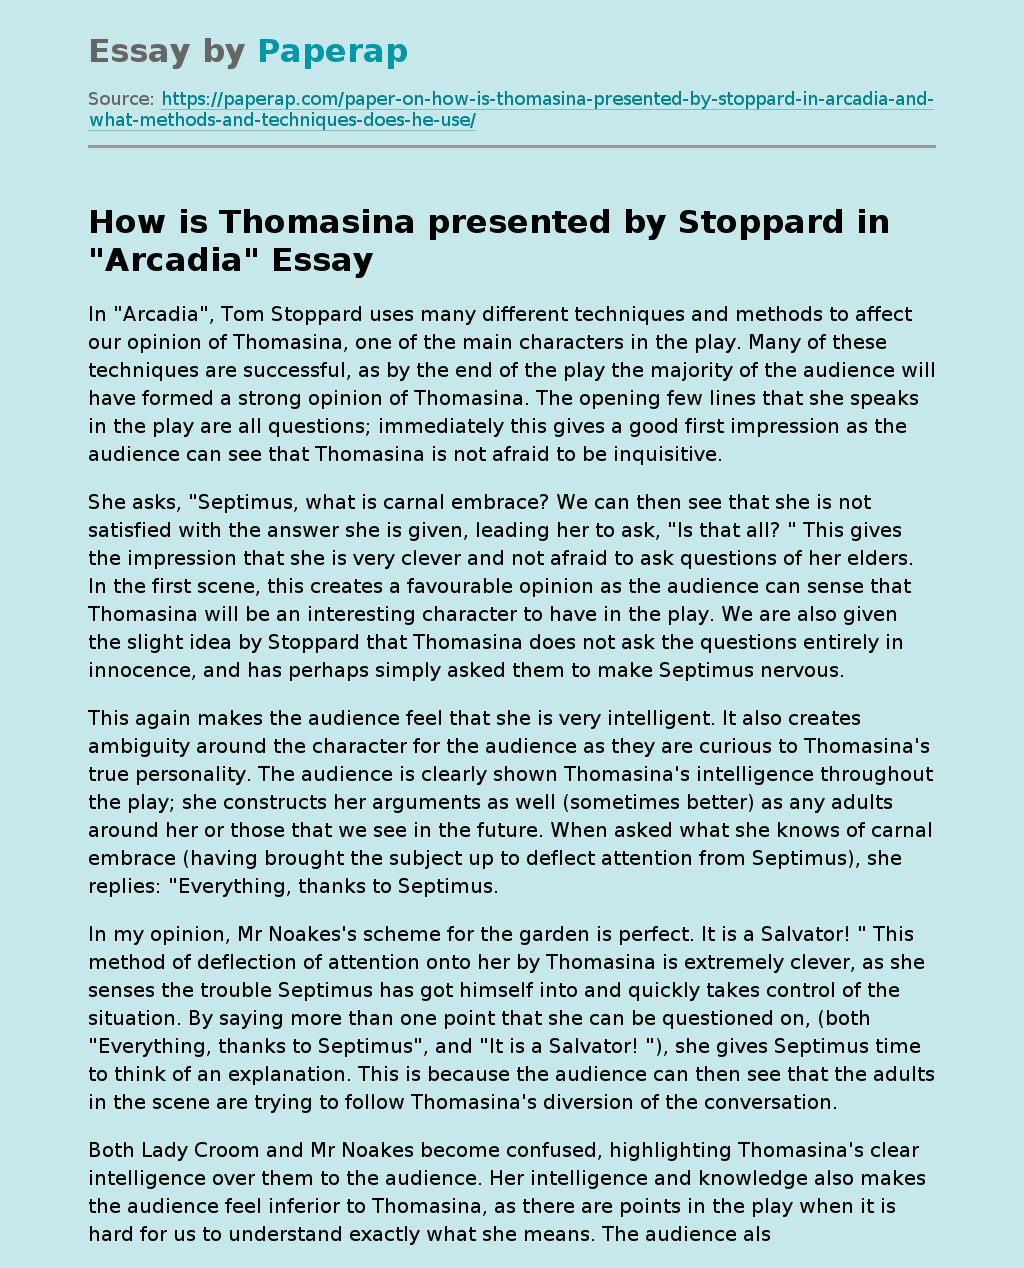 How is Thomasina presented by Stoppard in "Arcadia"